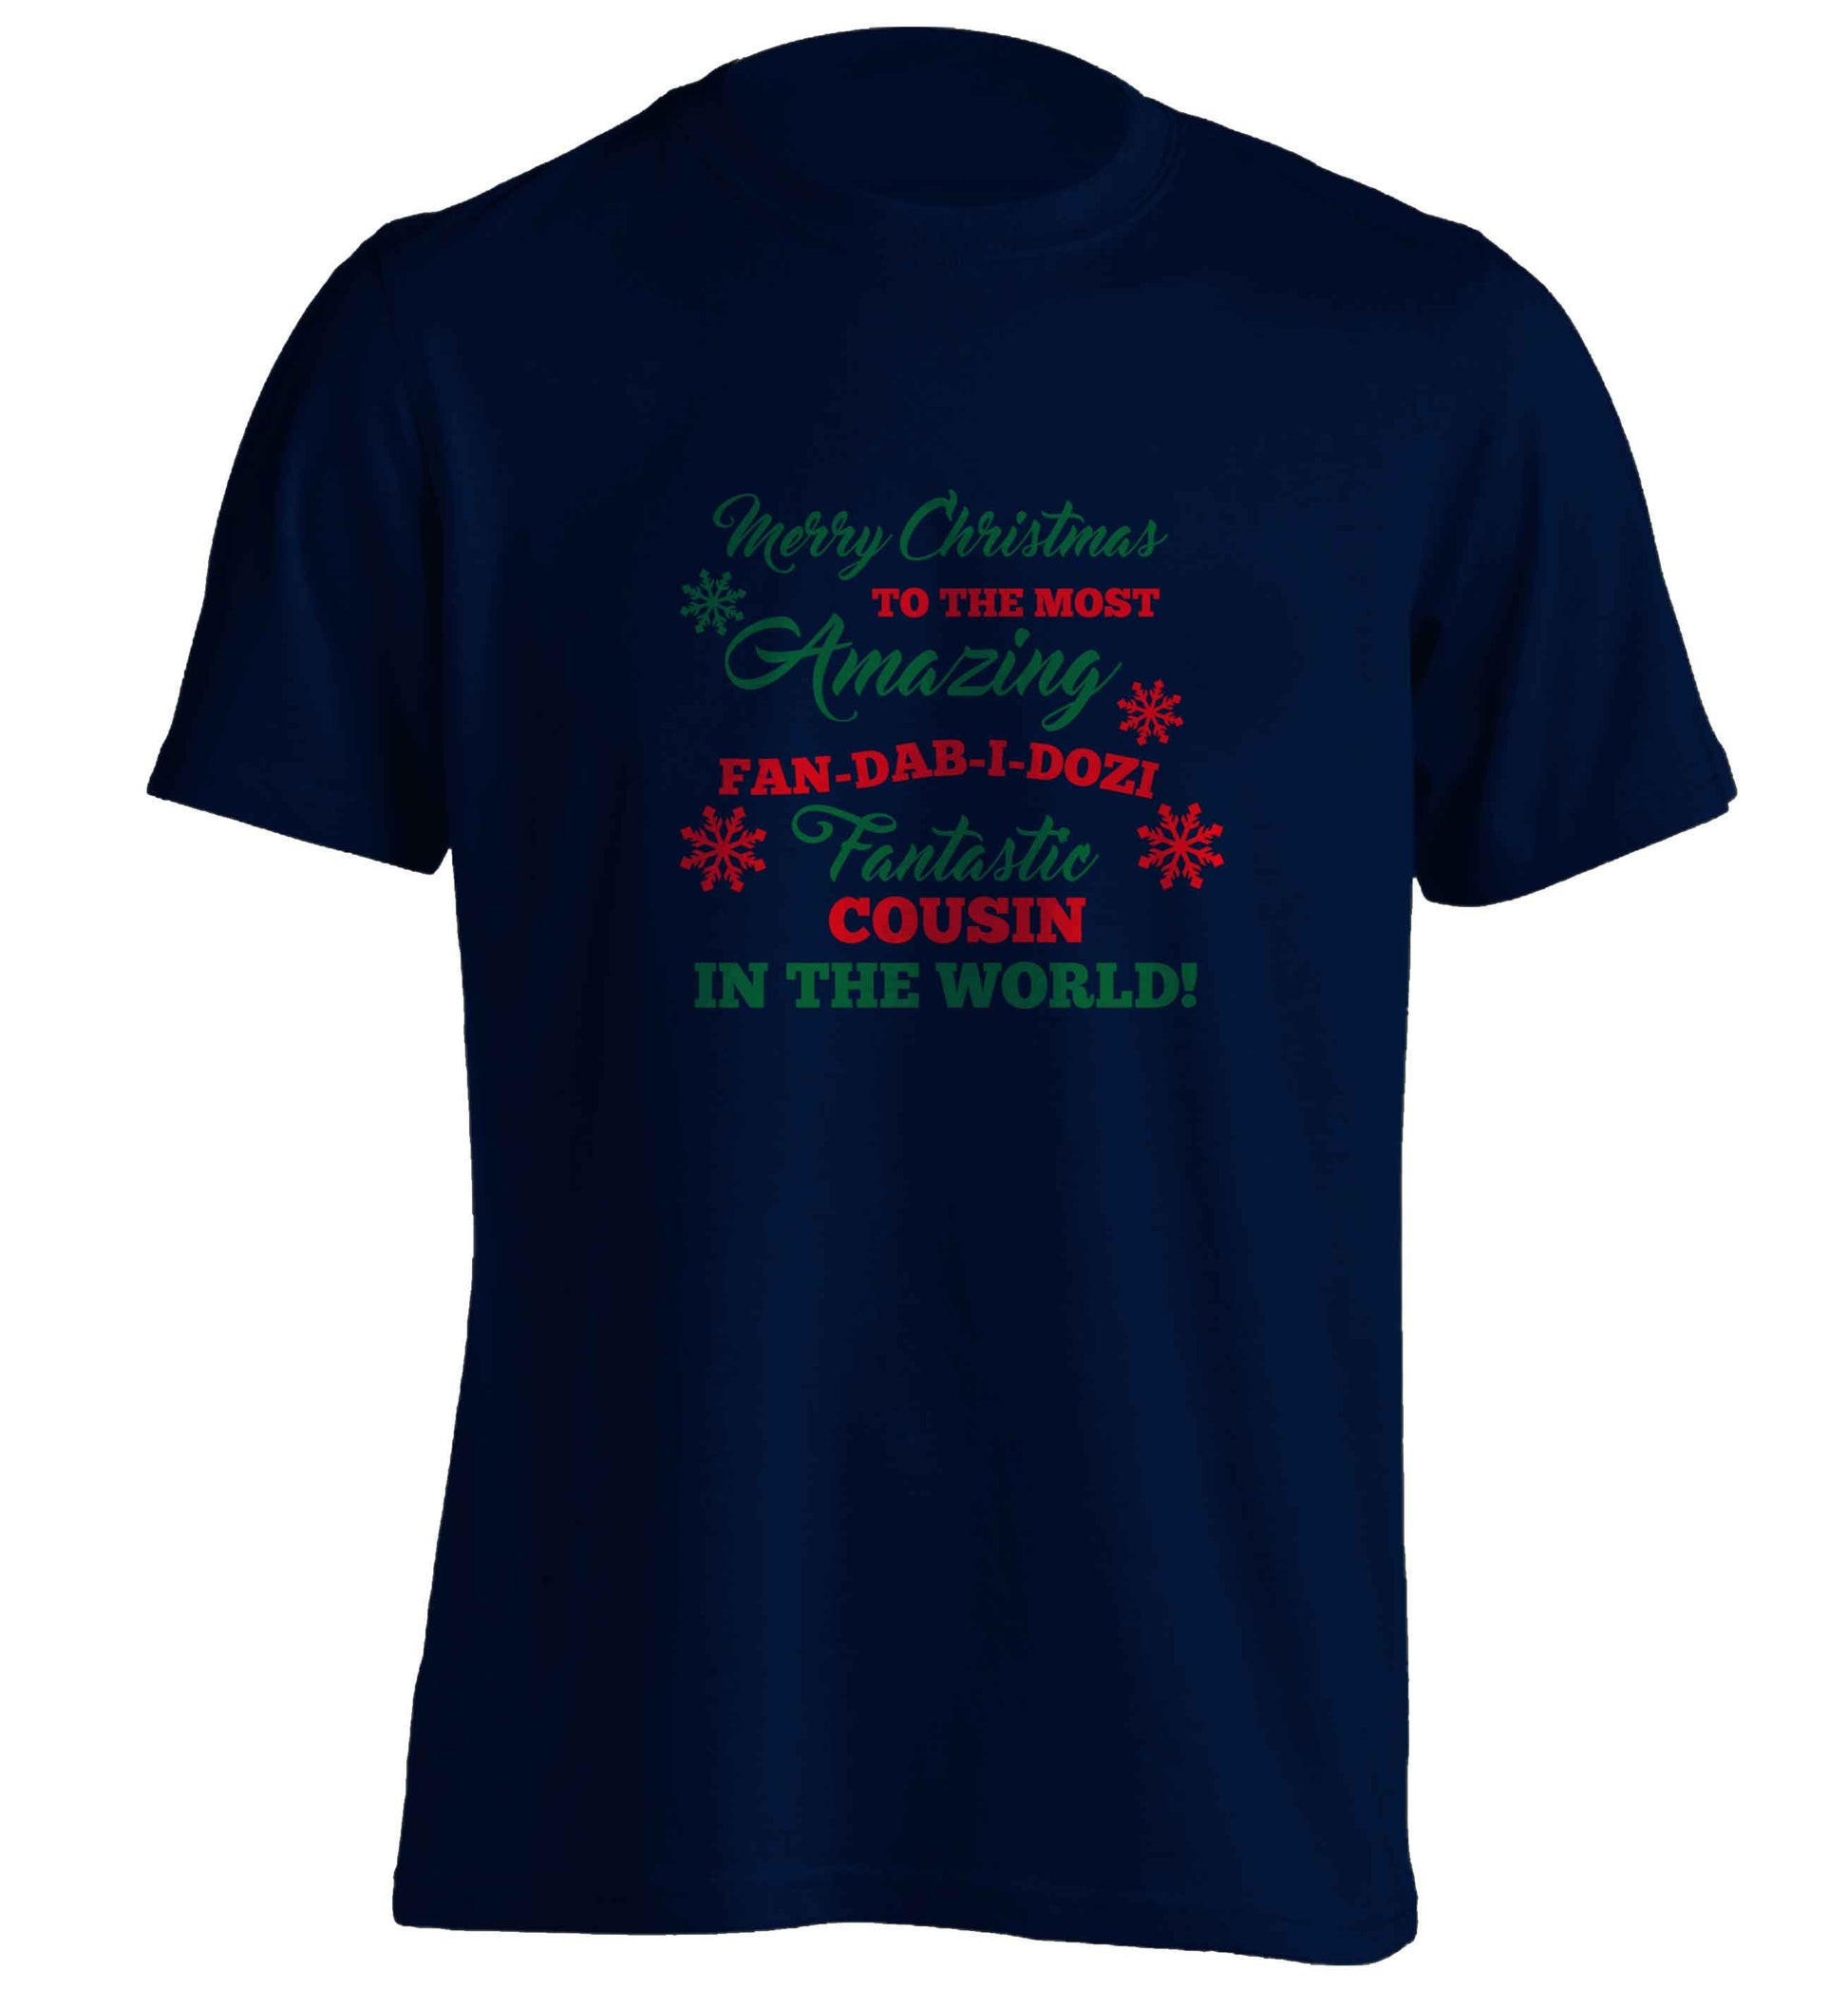 Merry Christmas to the most amazing fan-dab-i-dozi fantasic Cousin in the world adults unisex navy Tshirt 2XL